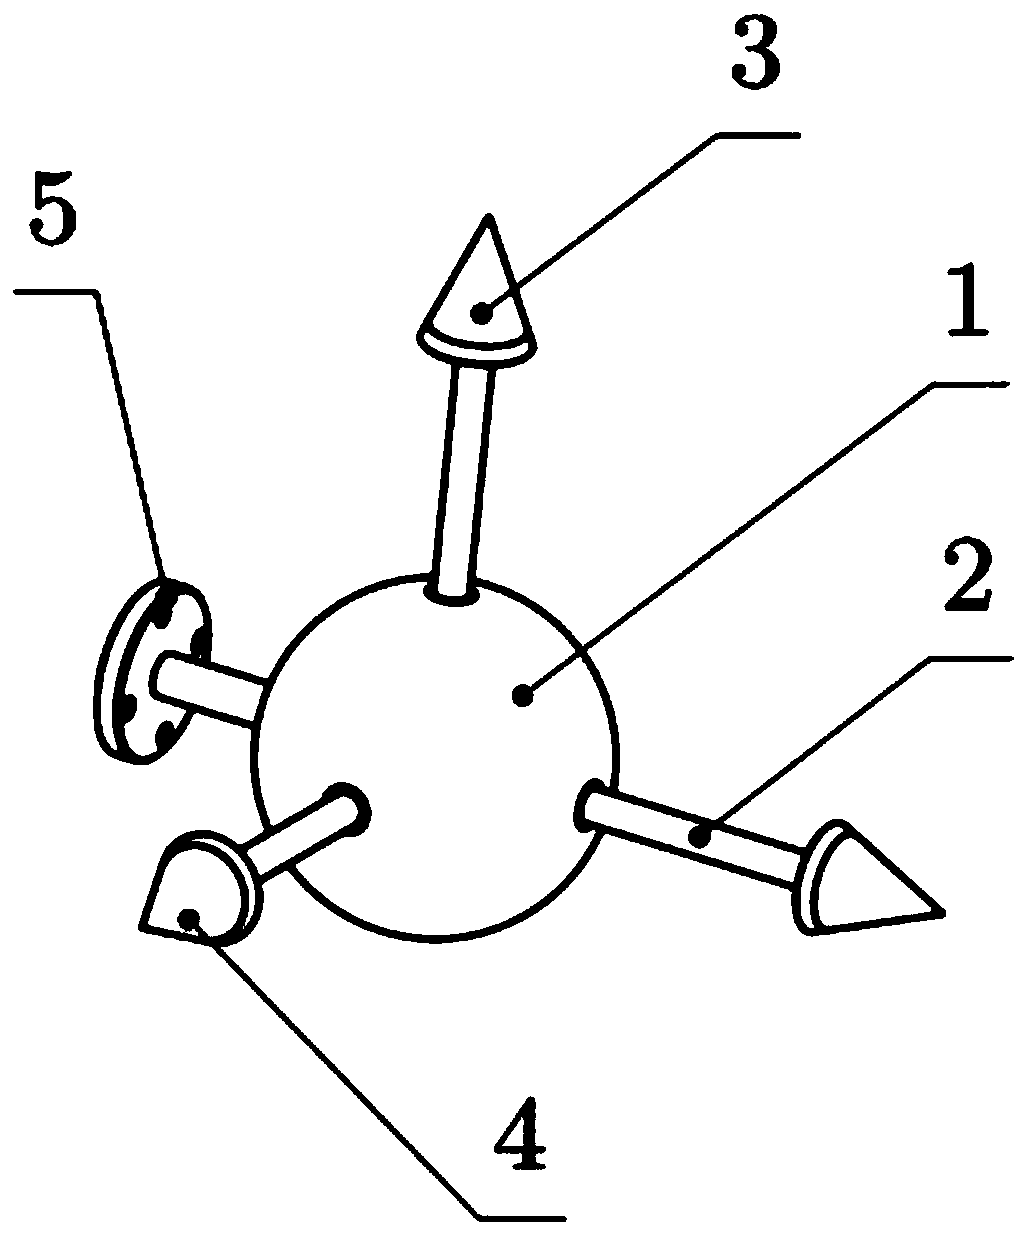 Tail end coordinate ball for robot demonstration